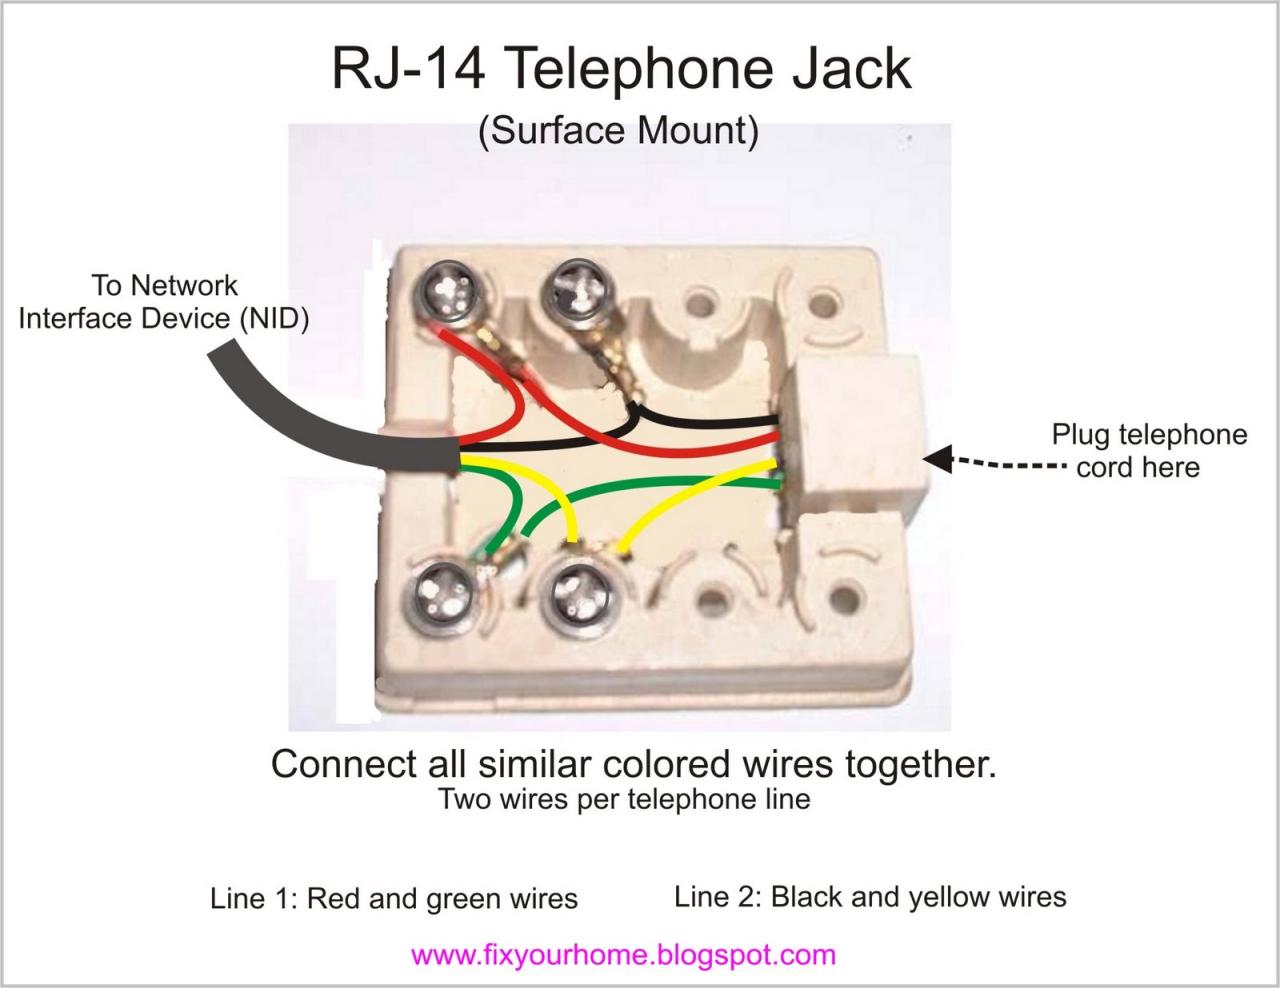 Fix Your Home Telephone Jack How to Wire It